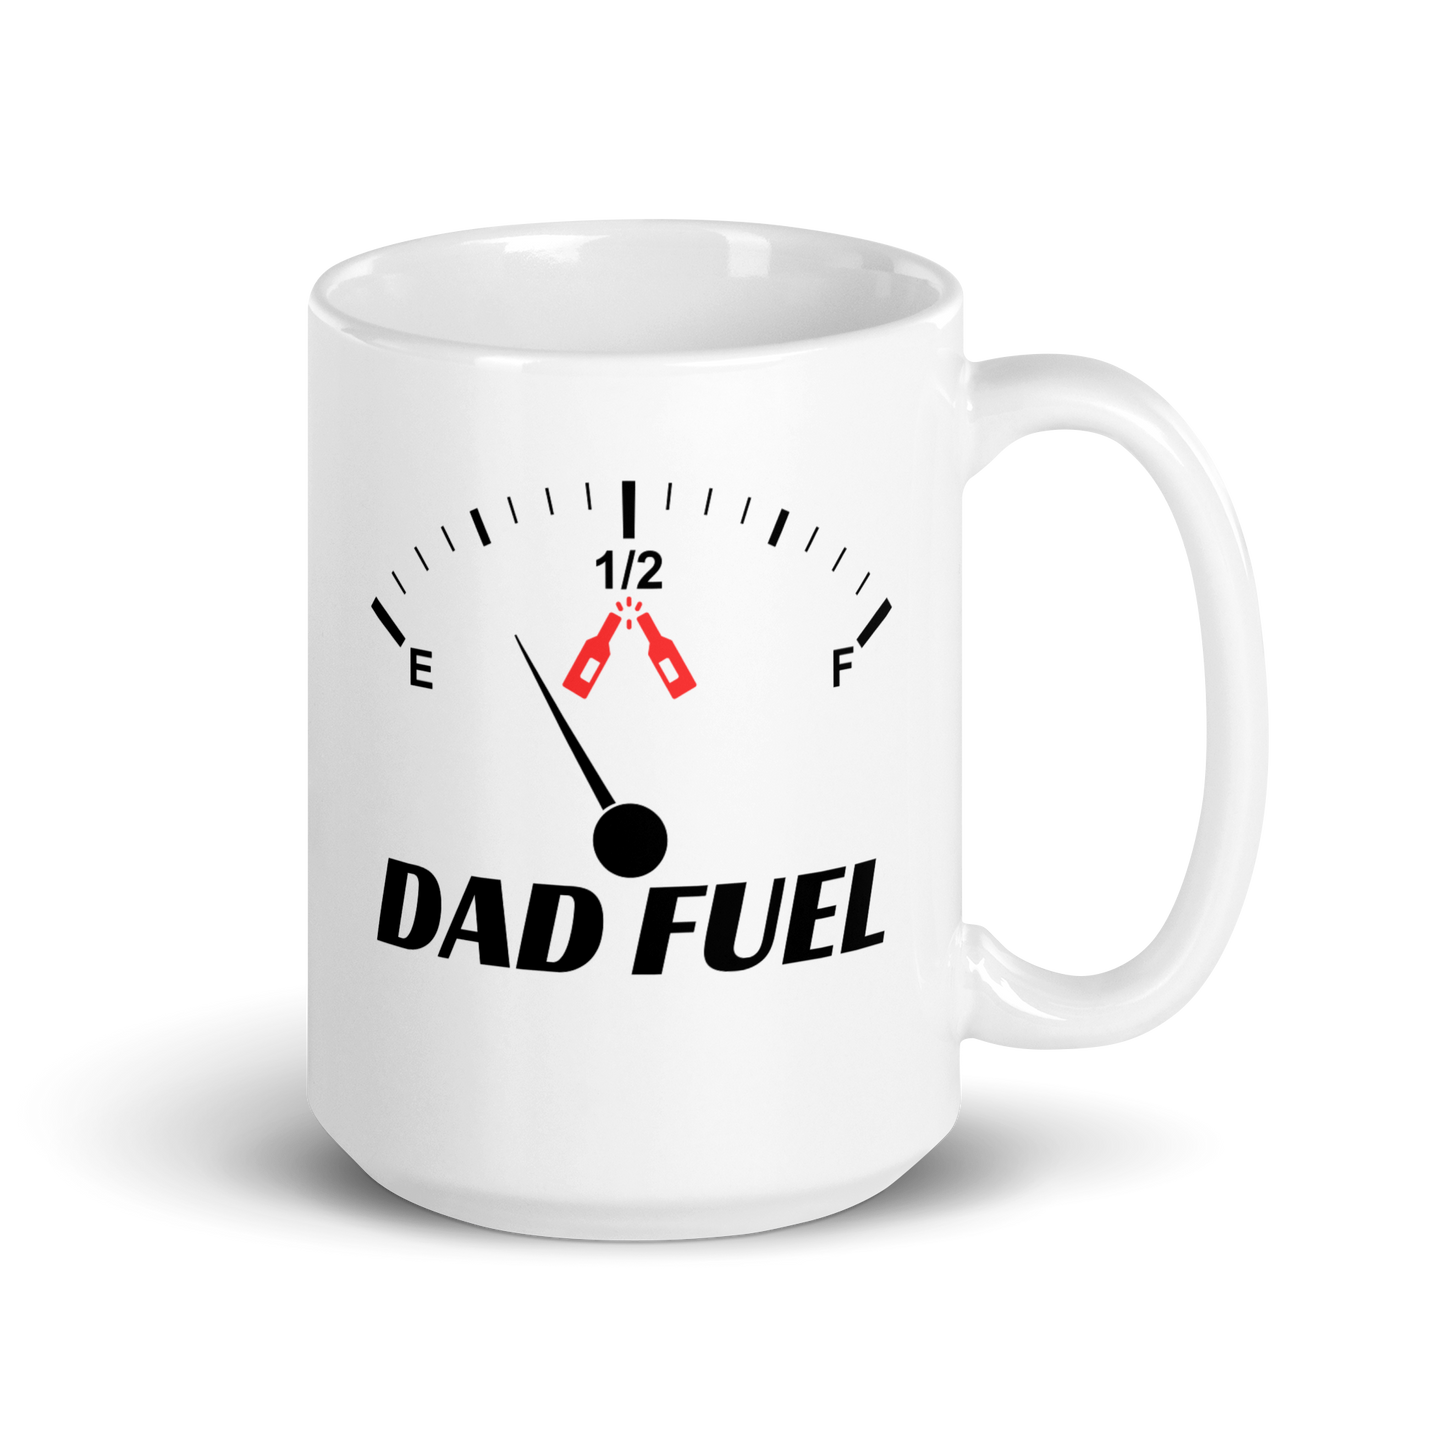 DAD FUEL 15oz Mug - Premium Ceramic | Essential Coffee Partner for Every Dad | Great Father's Day Gift